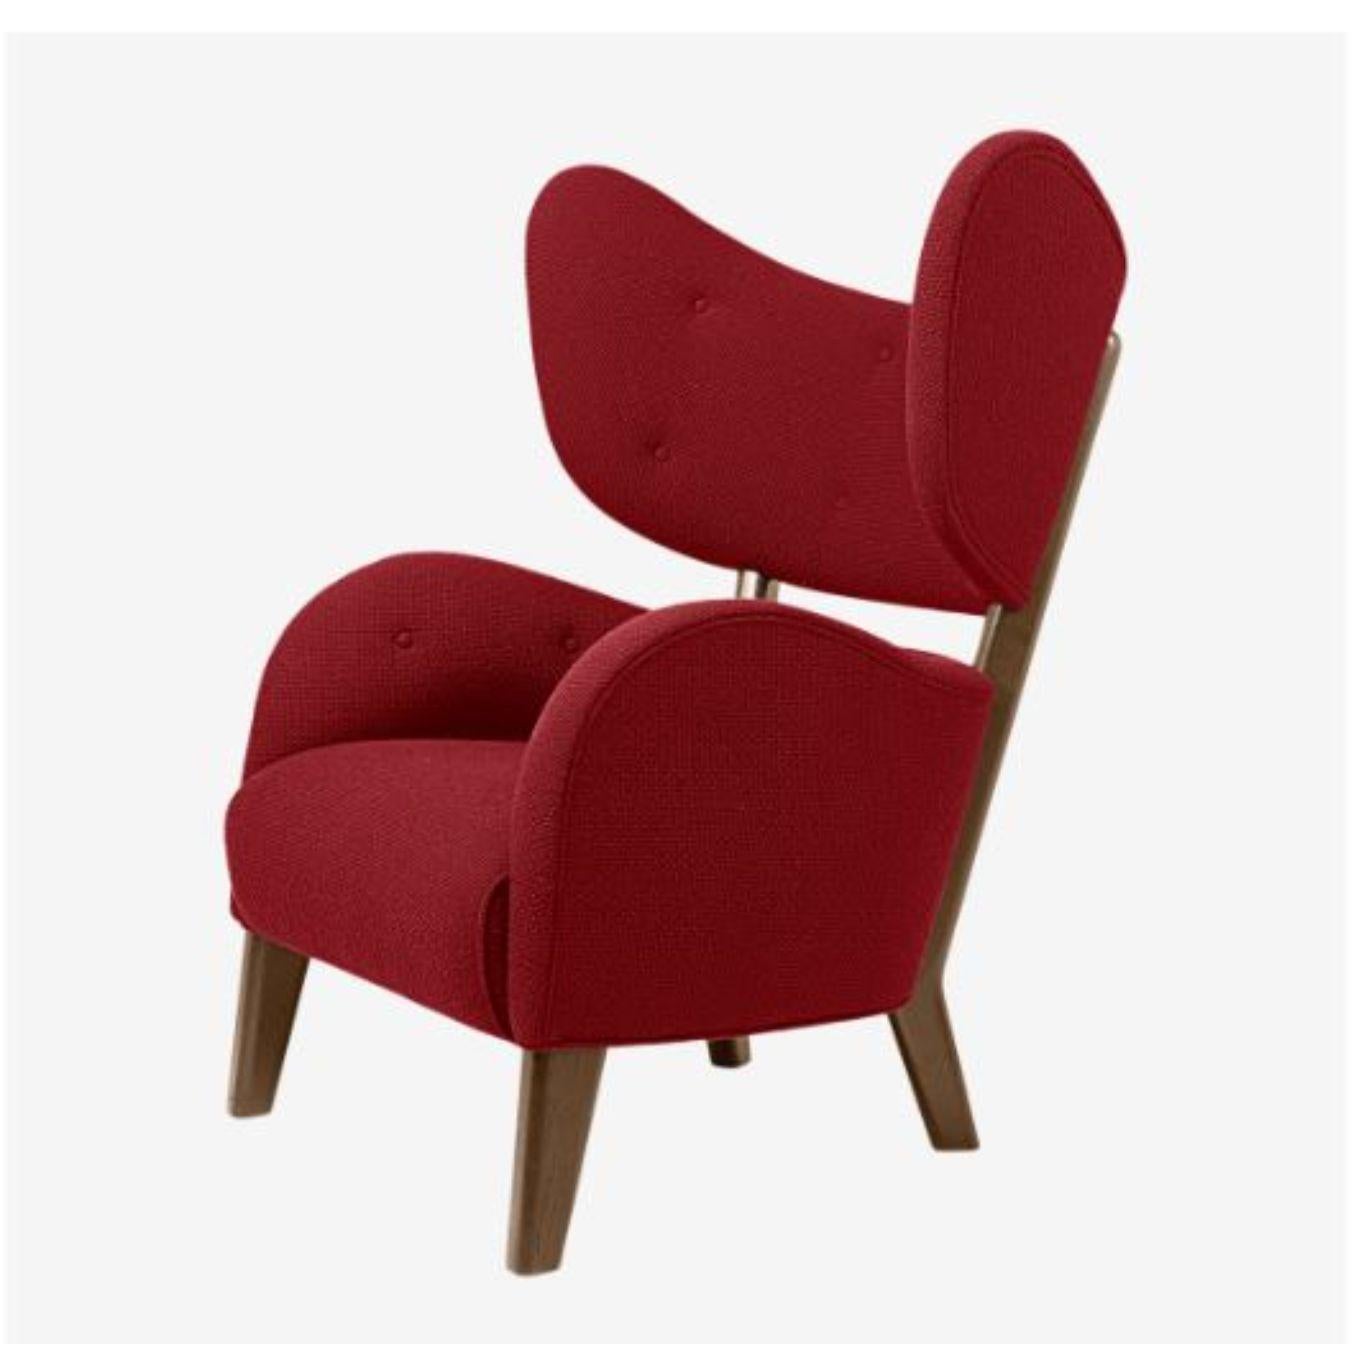 582 Raf Simons Vidar 3 my own chair by Lassen
Dimensions: D 88 x W 83 x H 102 cm 
Materials: textile, smoked oak, 
Also available in different colors and materials. 
Weight: 35 Kg

Flemming Lassen’s iconic armchair from 1938 was originally